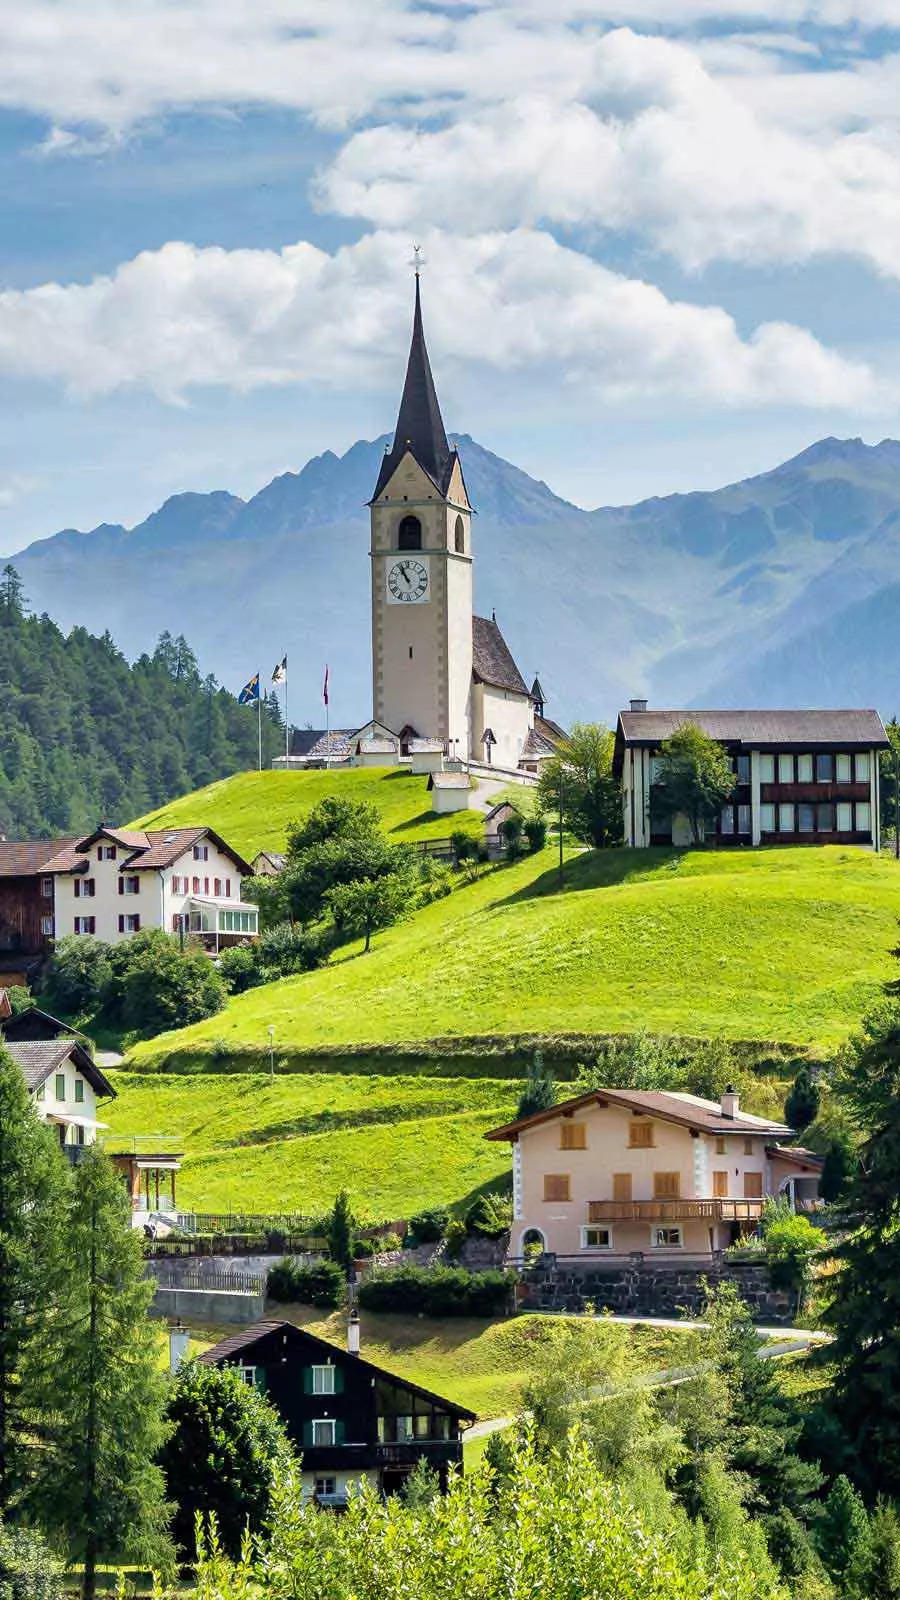 Switzerland: Fully vaccinated travelers need not present Covid-19 test report before entry